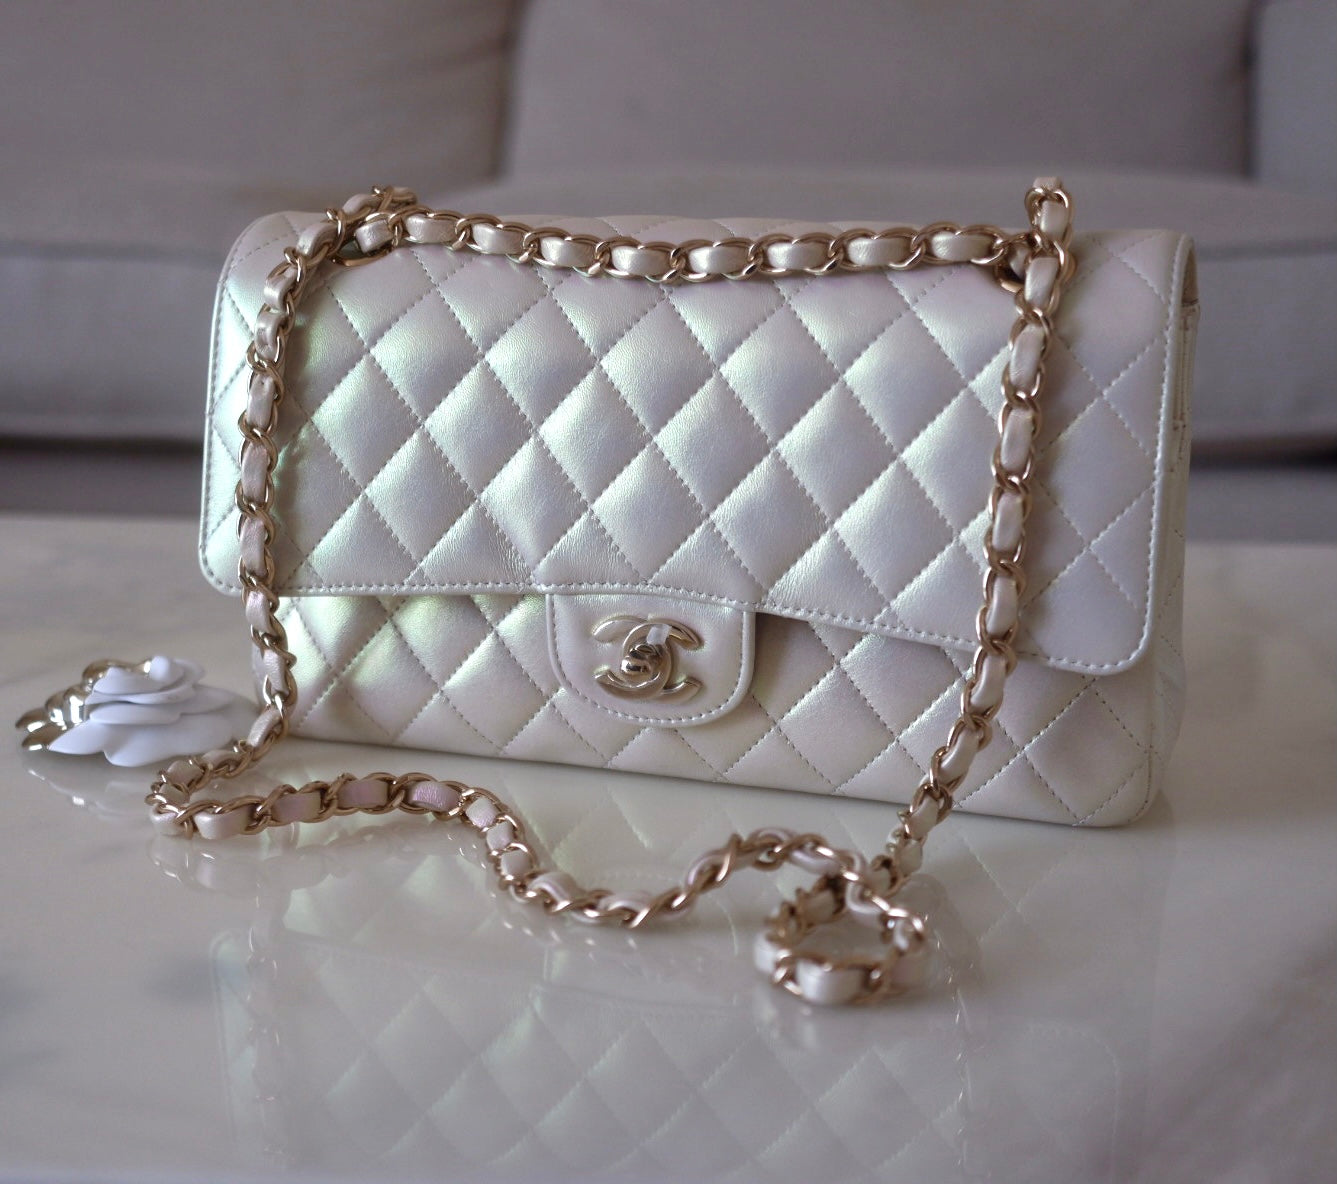 Chanel Mini Flap Classic Bag Pink - Quilted Jersey